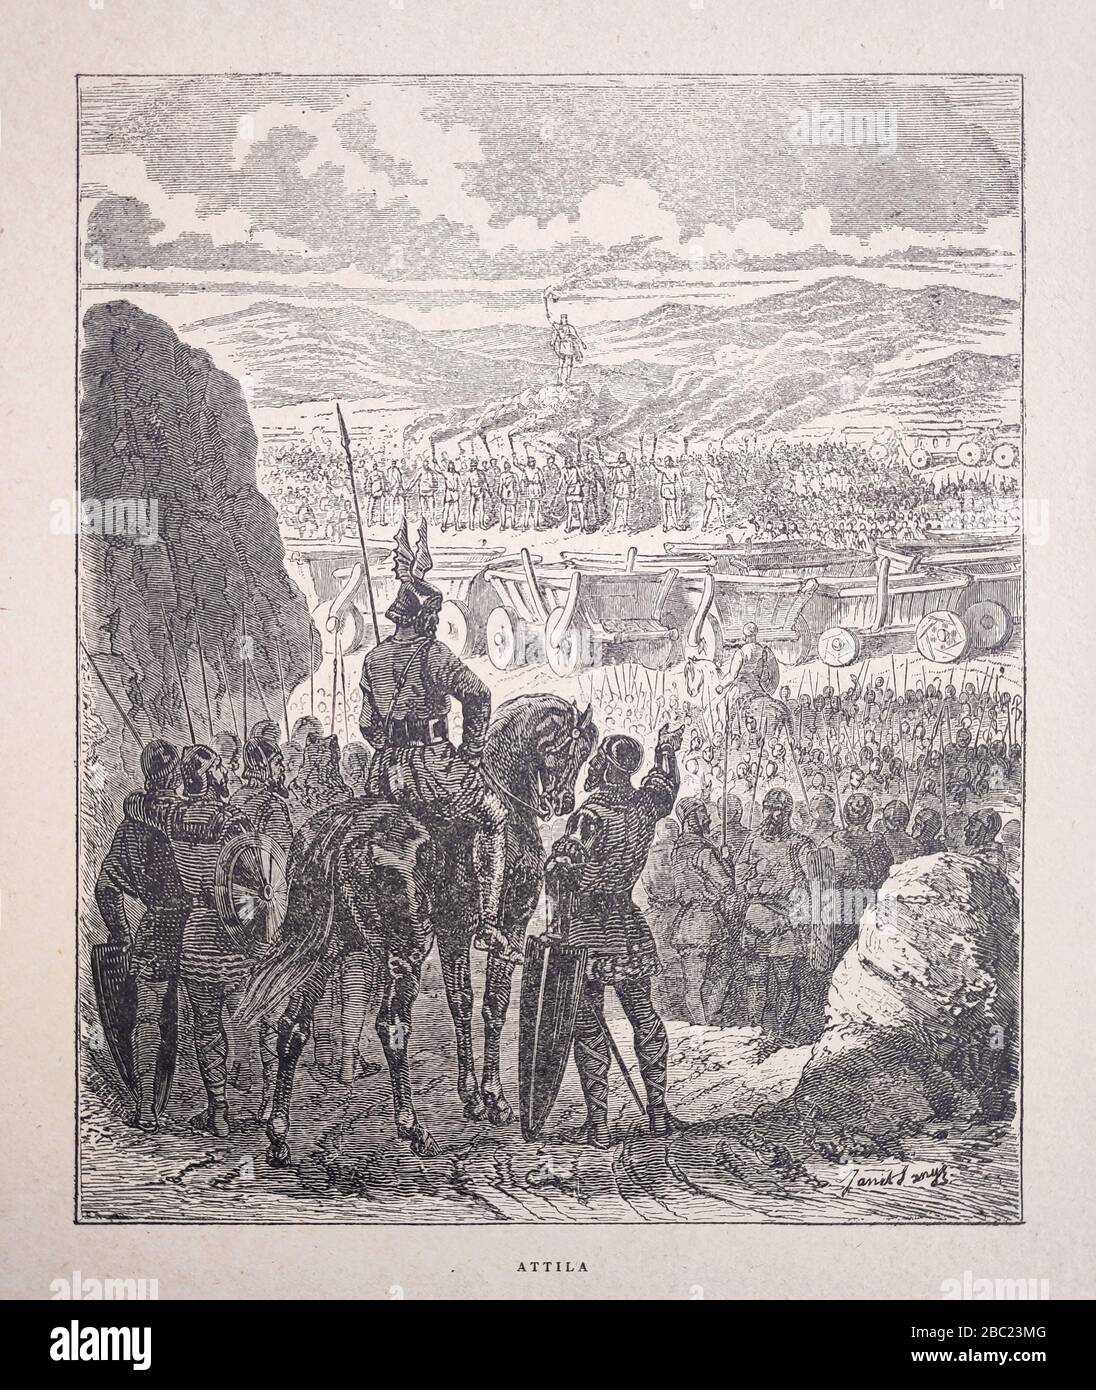 Illustration of Attila on a battlefield by Janit Sanys published in the late 19th century. Stock Photo